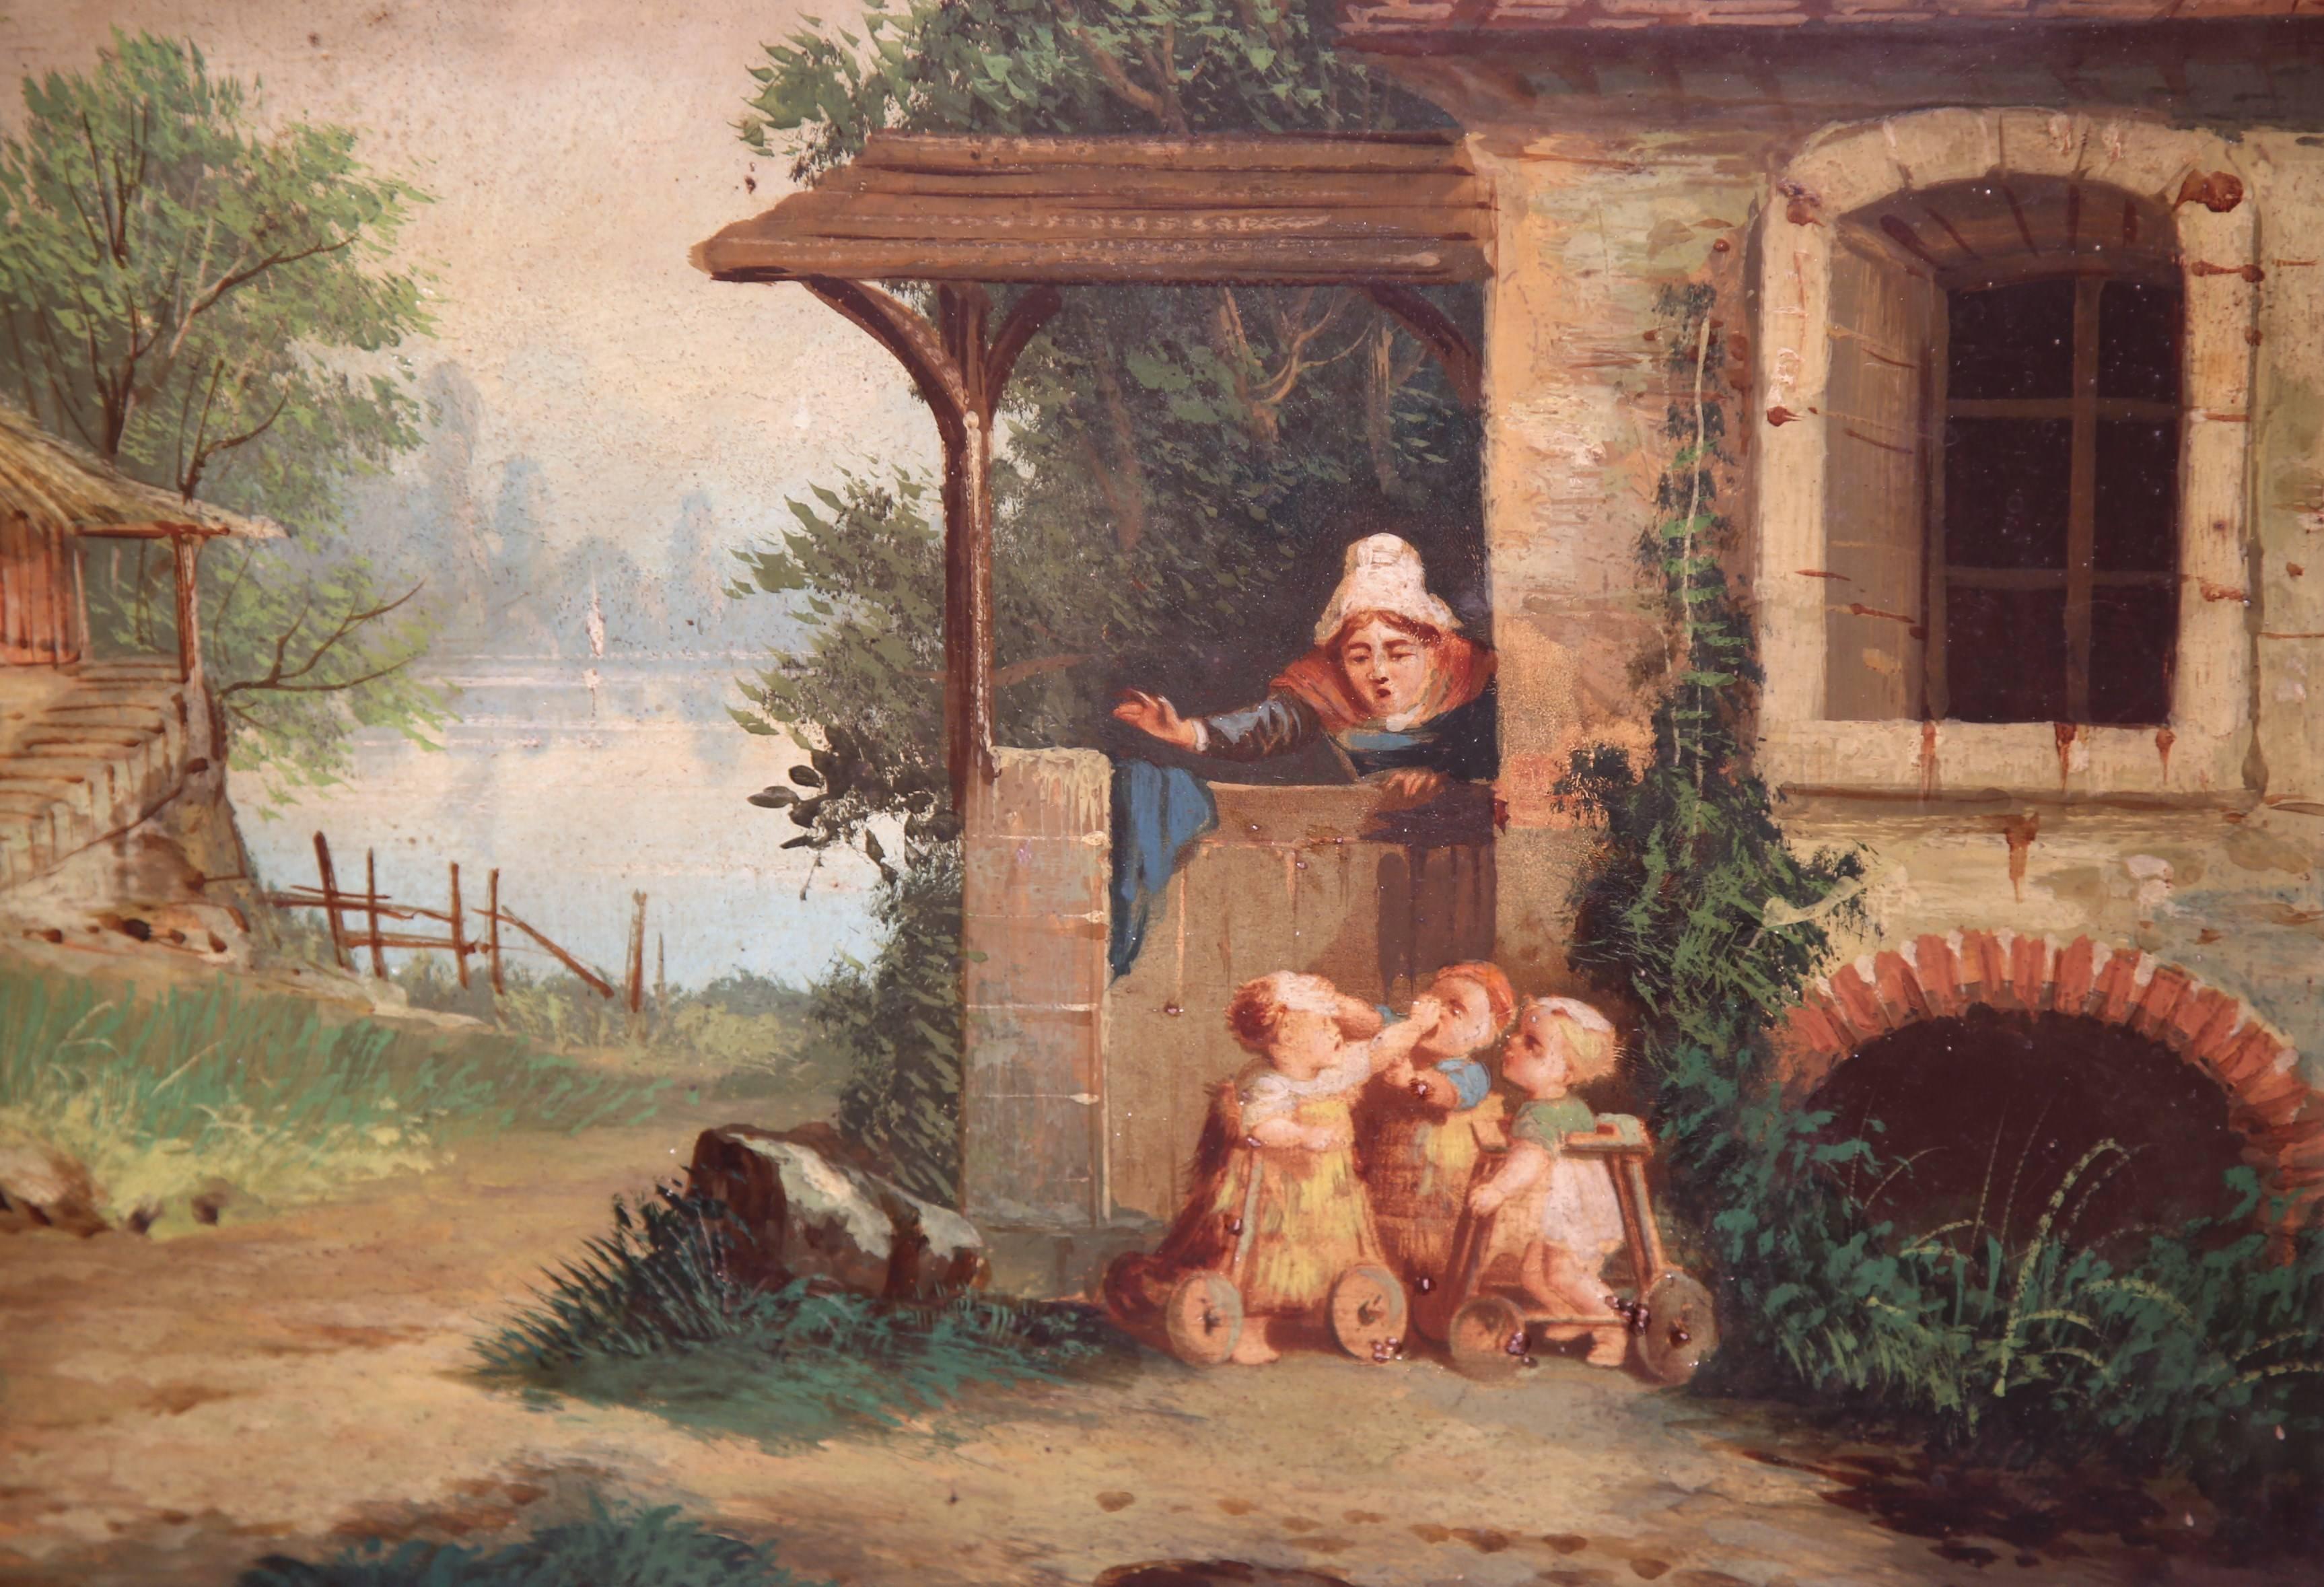 This unique, antique clock painting was painted on metal in France circa 1860. The oil painting sits inside a carved, gilt frame and depicts a village scene with three children playing and a mother looking over them. The original clock and the music